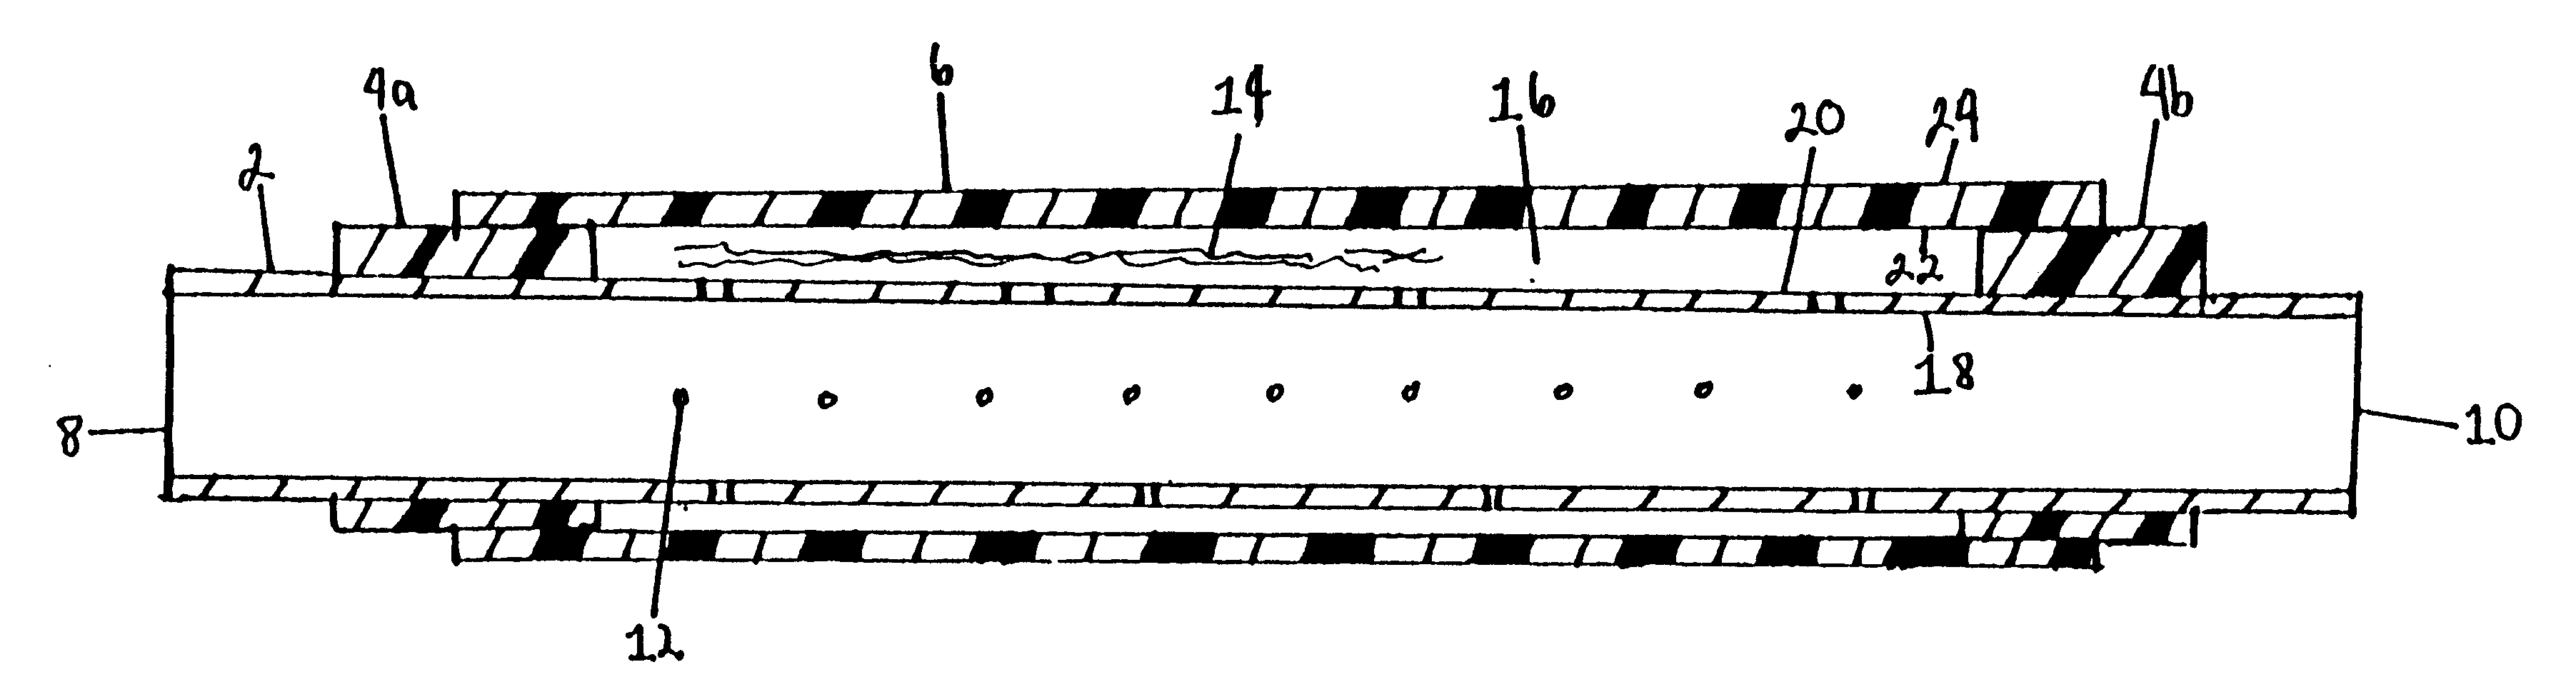 Process for impregnating a porous material with a cross-linkable composition